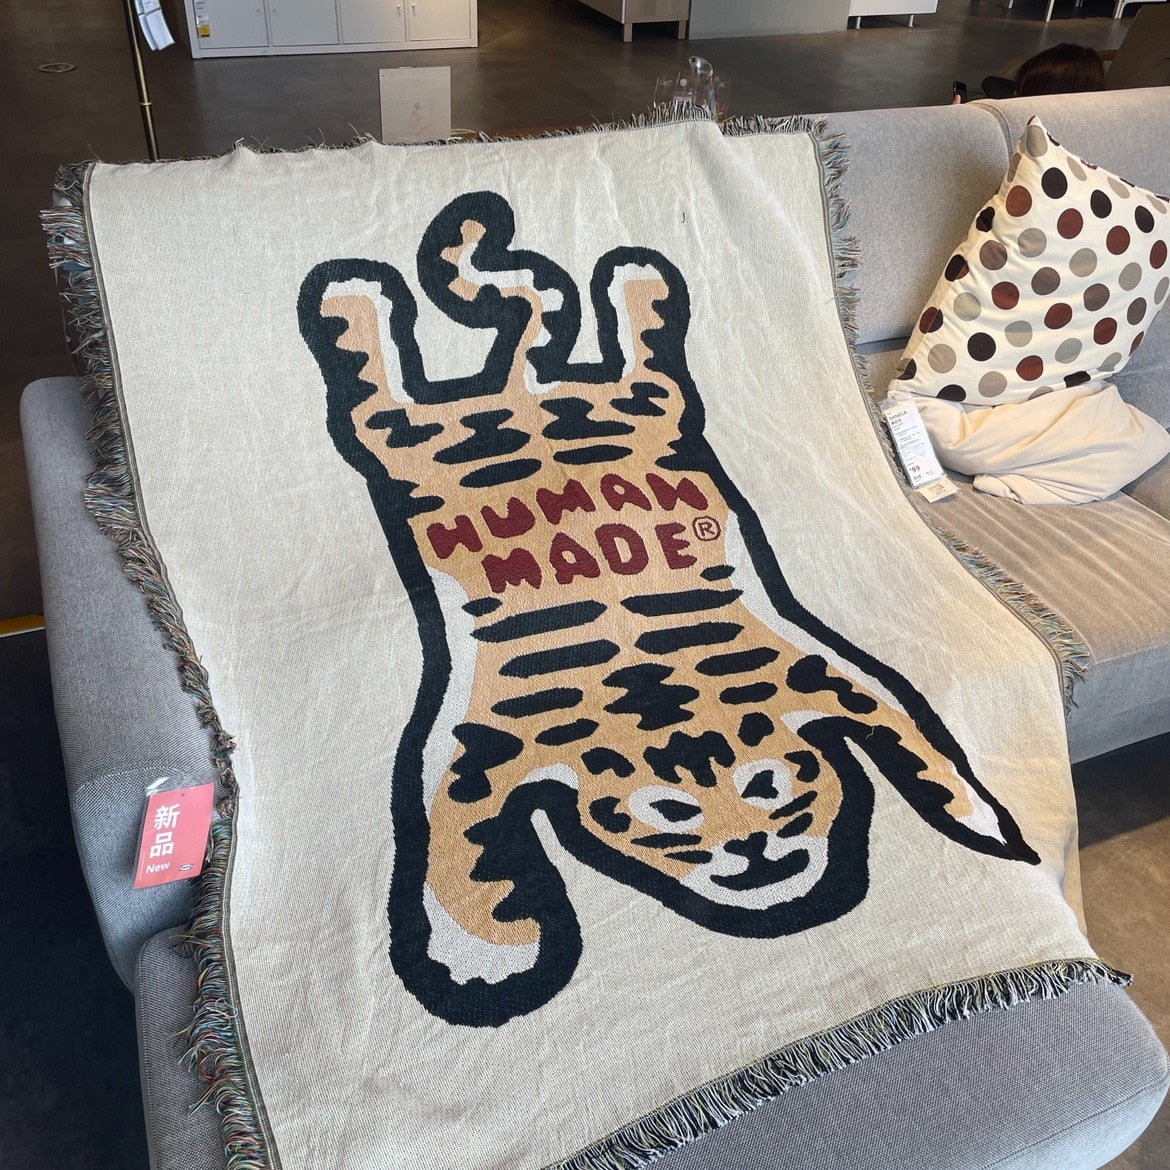 Human Made Tiger Throw / Woven Blanket / Tapestry